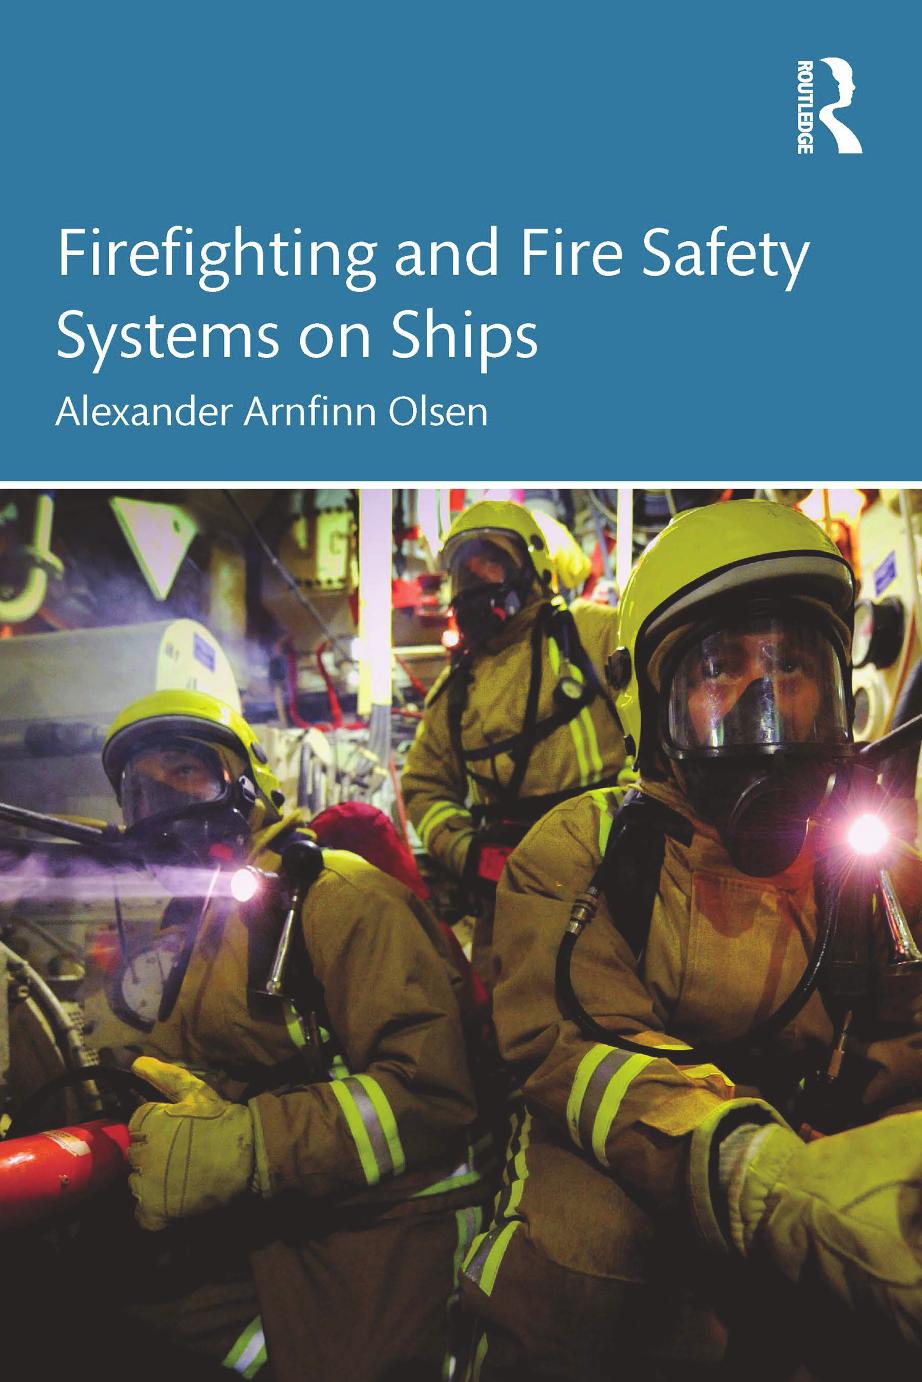 Firefighting and Fire Safety Systems on Ships by Alexander Arnfinn Olsen